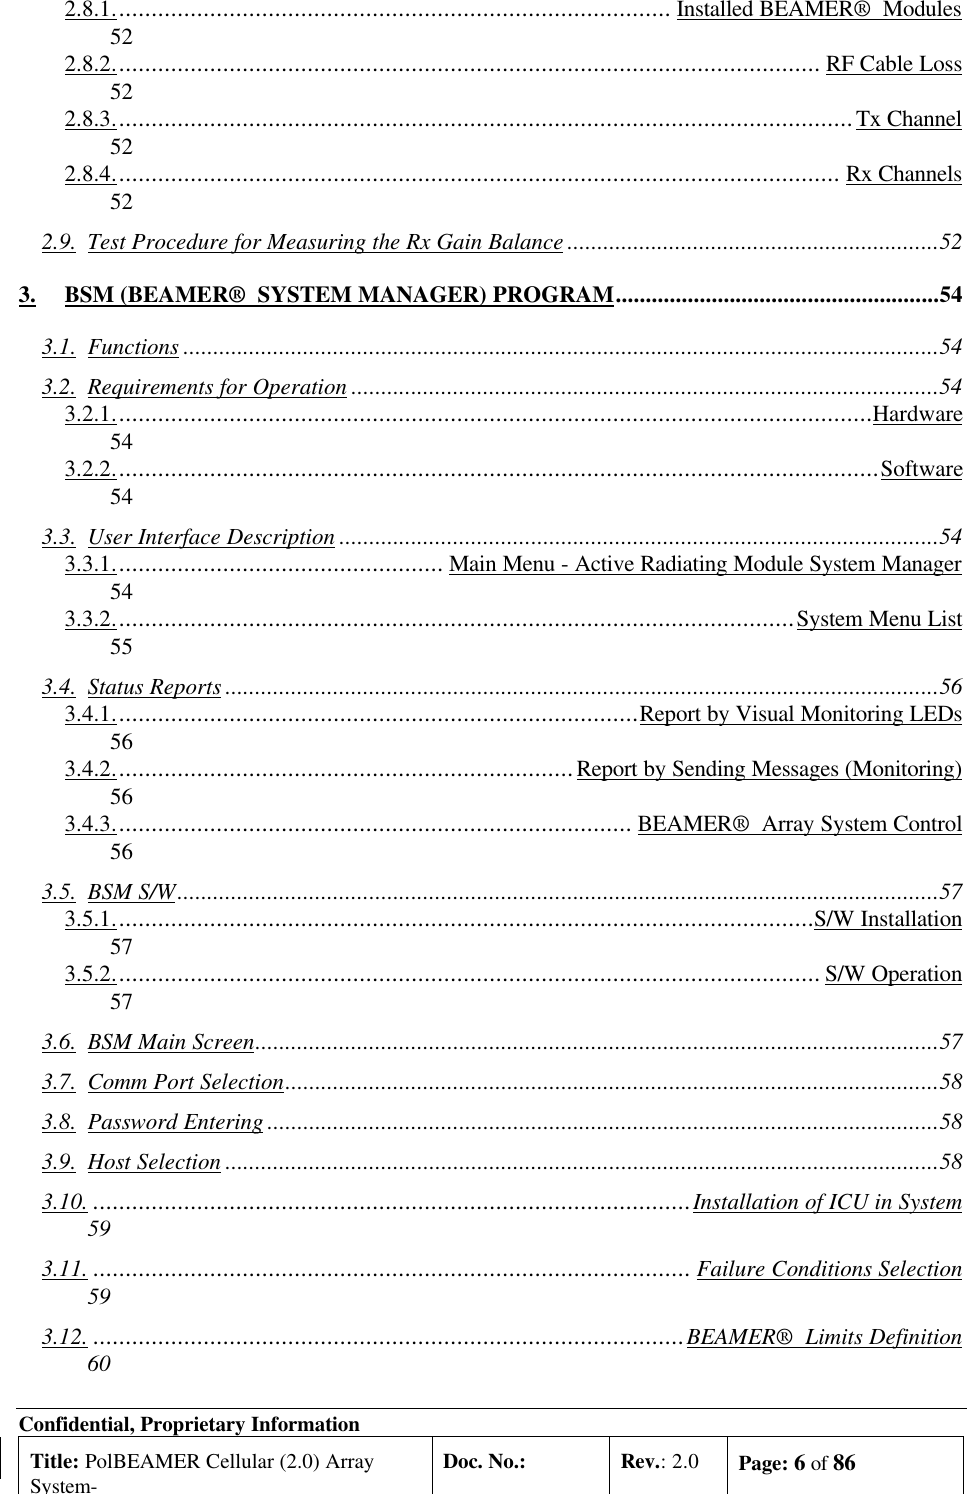 Confidential, Proprietary InformationTitle: PolBEAMER Cellular (2.0) ArraySystem-Doc. No.: Rev.: 2.0 Page: 6 of 862.8.1...................................................................................... Installed BEAMER®  Modules522.8.2............................................................................................................. RF Cable Loss522.8.3..................................................................................................................Tx Channel522.8.4................................................................................................................ Rx Channels522.9. Test Procedure for Measuring the Rx Gain Balance ..............................................................523. BSM (BEAMER®  SYSTEM MANAGER) PROGRAM......................................................543.1. Functions ..............................................................................................................................543.2. Requirements for Operation ..................................................................................................543.2.1.....................................................................................................................Hardware543.2.2......................................................................................................................Software543.3. User Interface Description ....................................................................................................543.3.1................................................... Main Menu - Active Radiating Module System Manager543.3.2.........................................................................................................System Menu List553.4. Status Reports .......................................................................................................................563.4.1.................................................................................Report by Visual Monitoring LEDs563.4.2.......................................................................Report by Sending Messages (Monitoring)563.4.3................................................................................ BEAMER®  Array System Control563.5. BSM S/W...............................................................................................................................573.5.1............................................................................................................S/W Installation573.5.2............................................................................................................. S/W Operation573.6. BSM Main Screen..................................................................................................................573.7. Comm Port Selection.............................................................................................................583.8. Password Entering ................................................................................................................583.9. Host Selection .......................................................................................................................583.10. ............................................................................................Installation of ICU in System593.11. ............................................................................................ Failure Conditions Selection593.12. ...........................................................................................BEAMER®  Limits Definition60